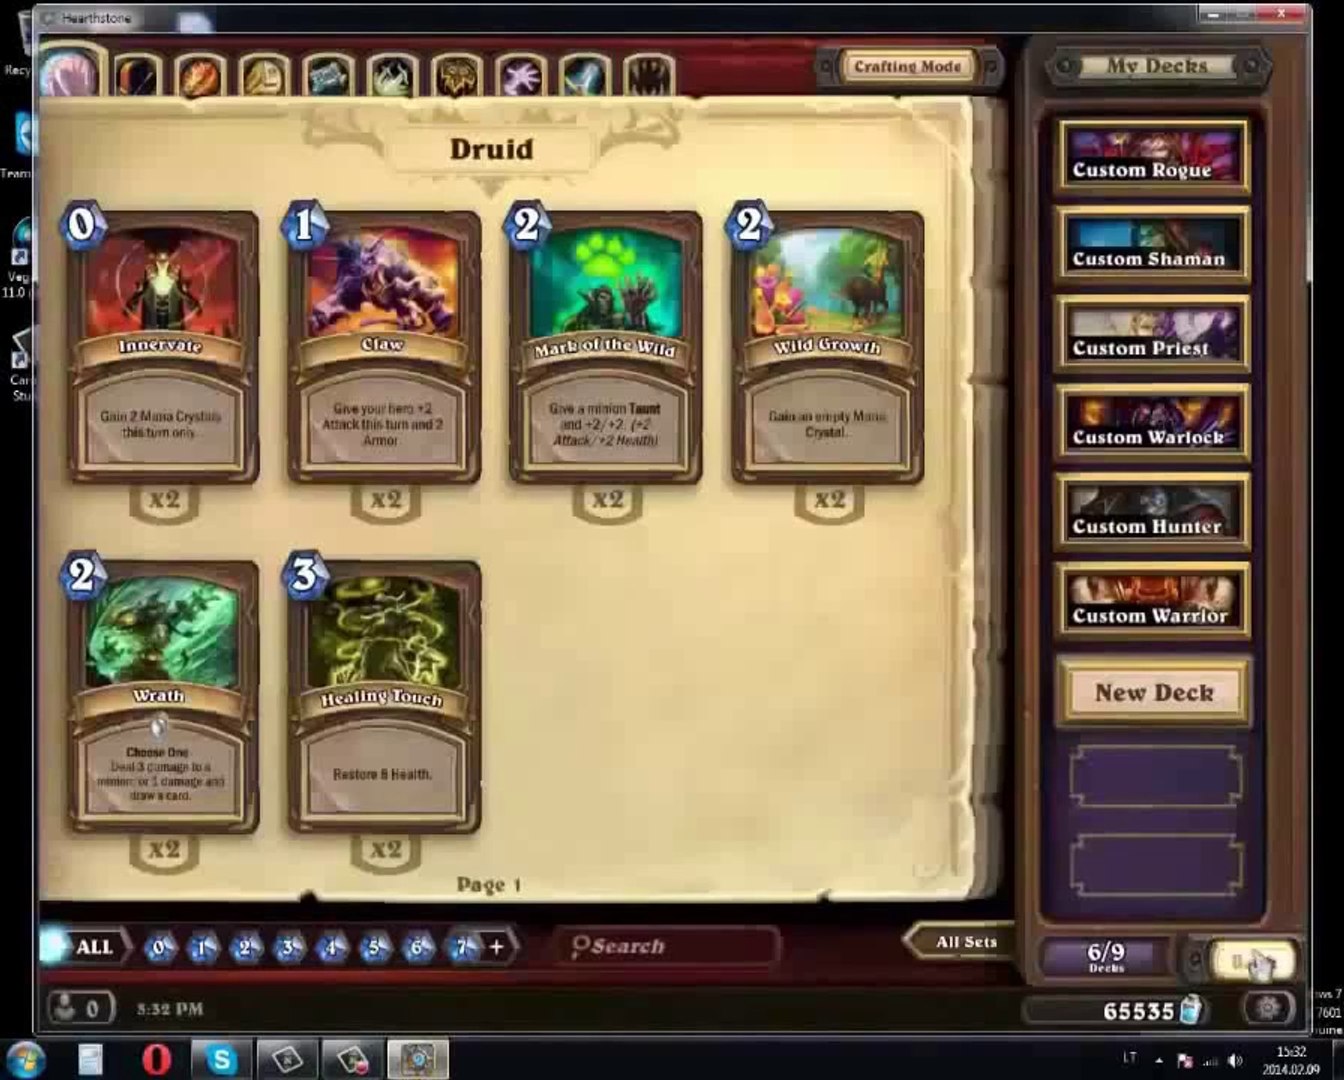 Hearthstone Hack Arcane Dust Packs Updated 2014 Video - roblox hack robux cheat engine 61